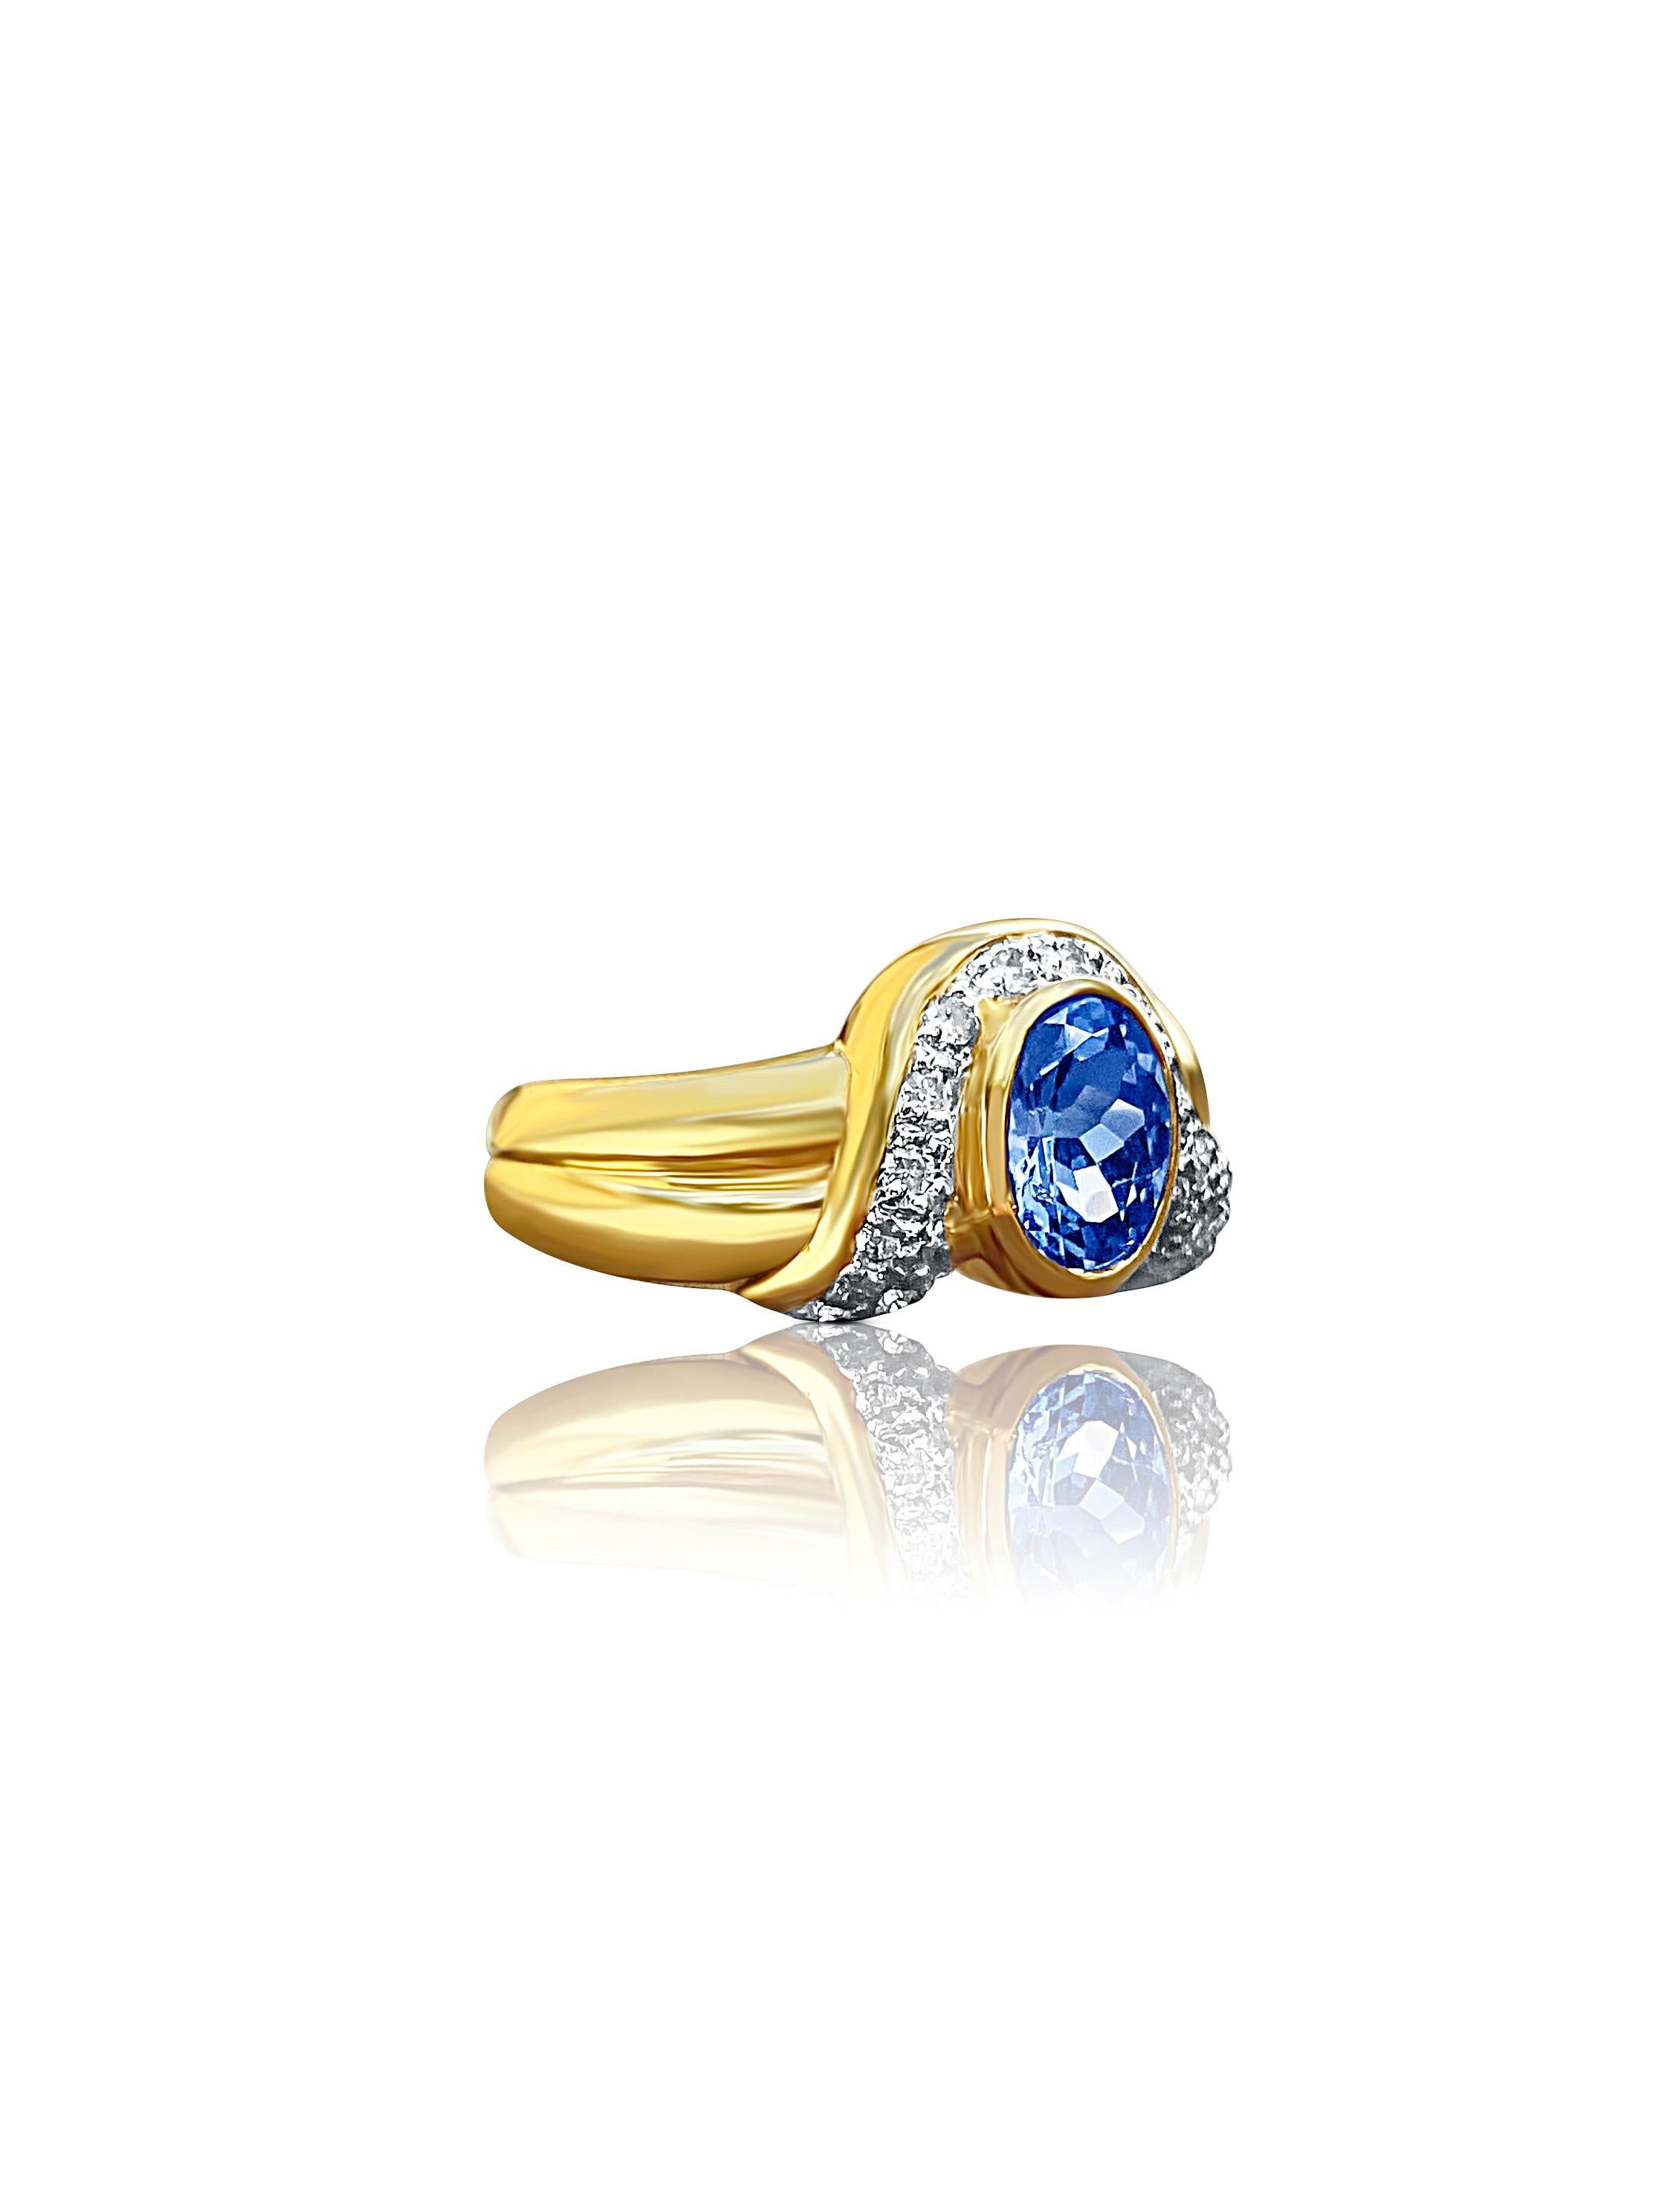 Vintage Heirloom Centering a 0.62 Carat Tanzanite, accented by Round-Brilliant Cut Diamonds, and set in 14K Yellow Gold.

Details:
✔ Stone: Tanzanite
✔ Stone Weight (Carat): 0.62 Carats
✔ Stone Cut: Oval
✔ Stone Origin: Tanzania
✔ Ring: 14K Yellow,